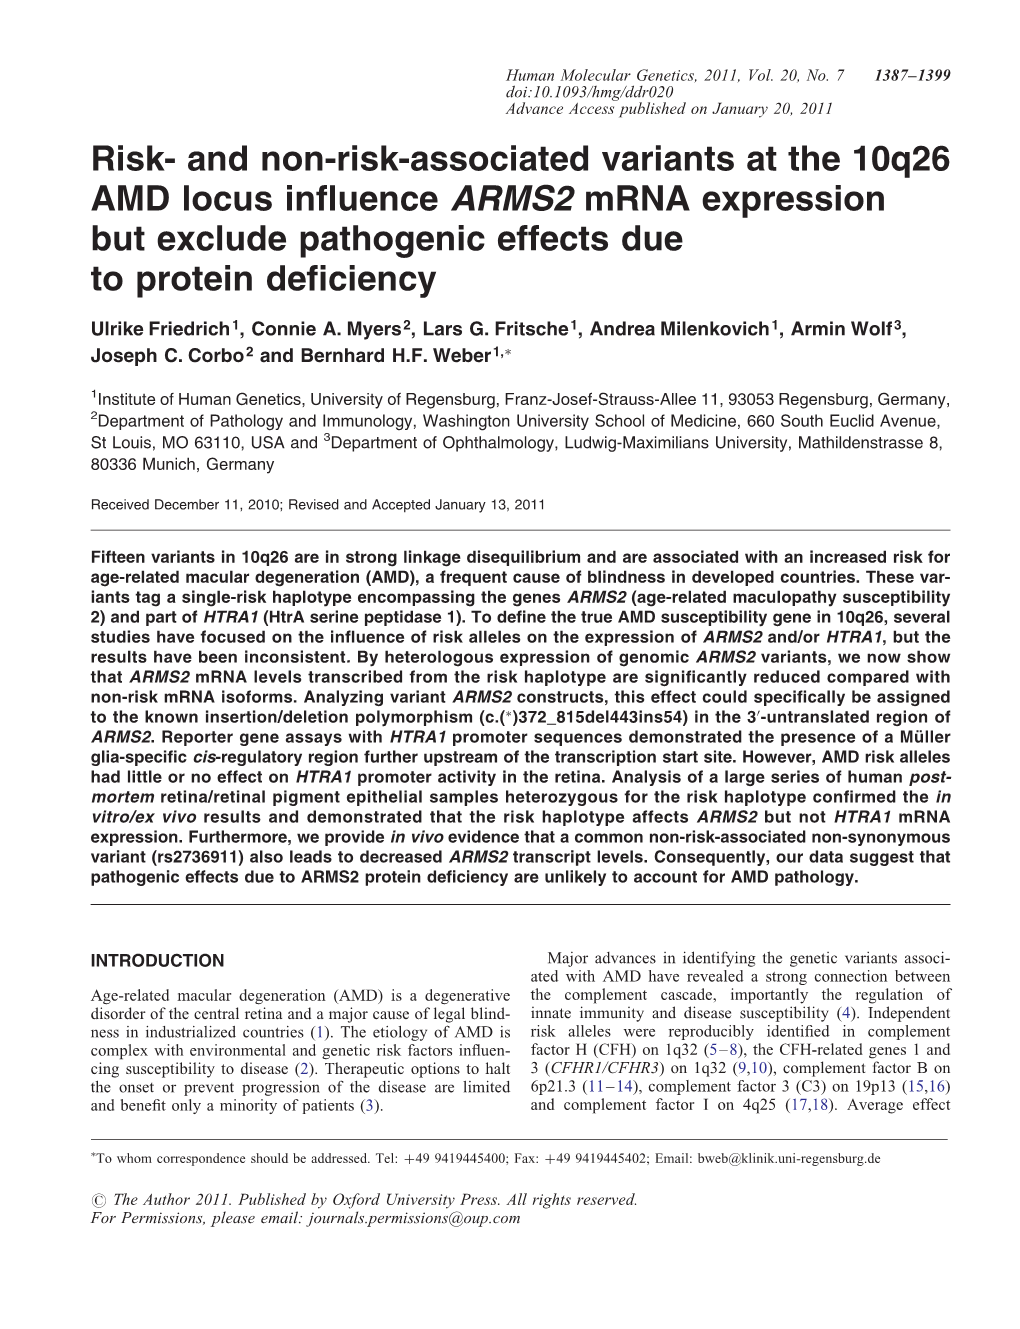 And Non-Risk-Associated Variants at the 10Q26 AMD Locus Inﬂuence ARMS2 Mrna Expression but Exclude Pathogenic Effects Due to Protein Deﬁciency